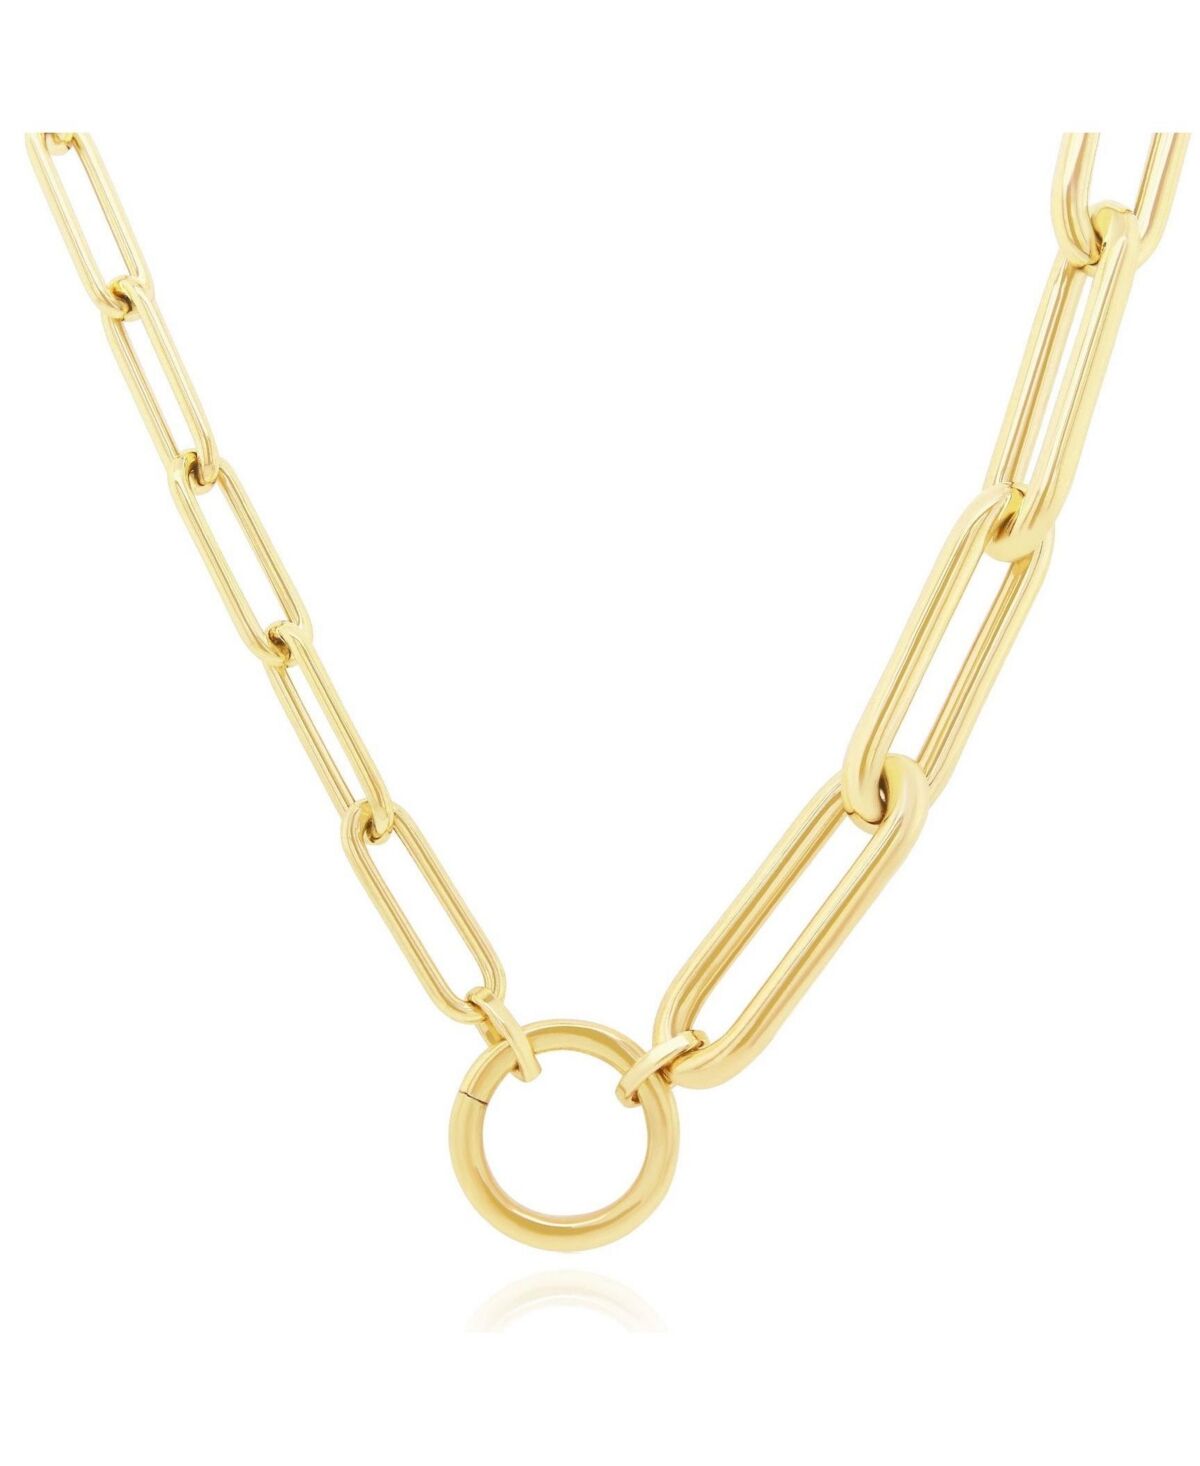 The Lovery Half & Half Paperclip Charm Holder Chain Necklace - Gold